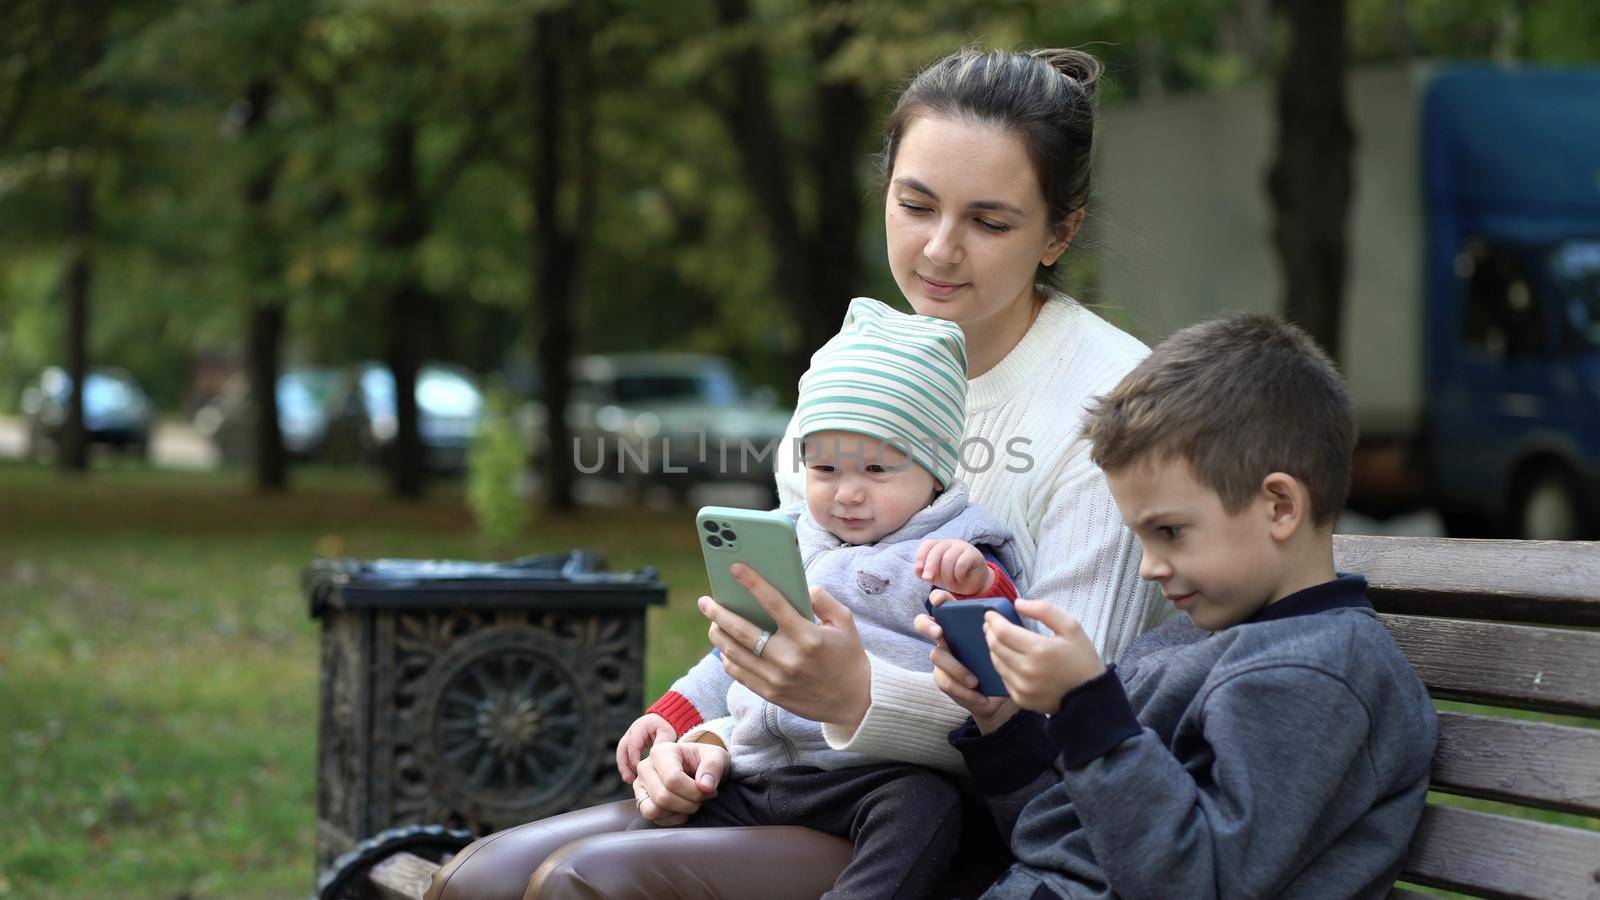 The nanny babysits the children while walking outdoors and playing on the phone by Petrokill